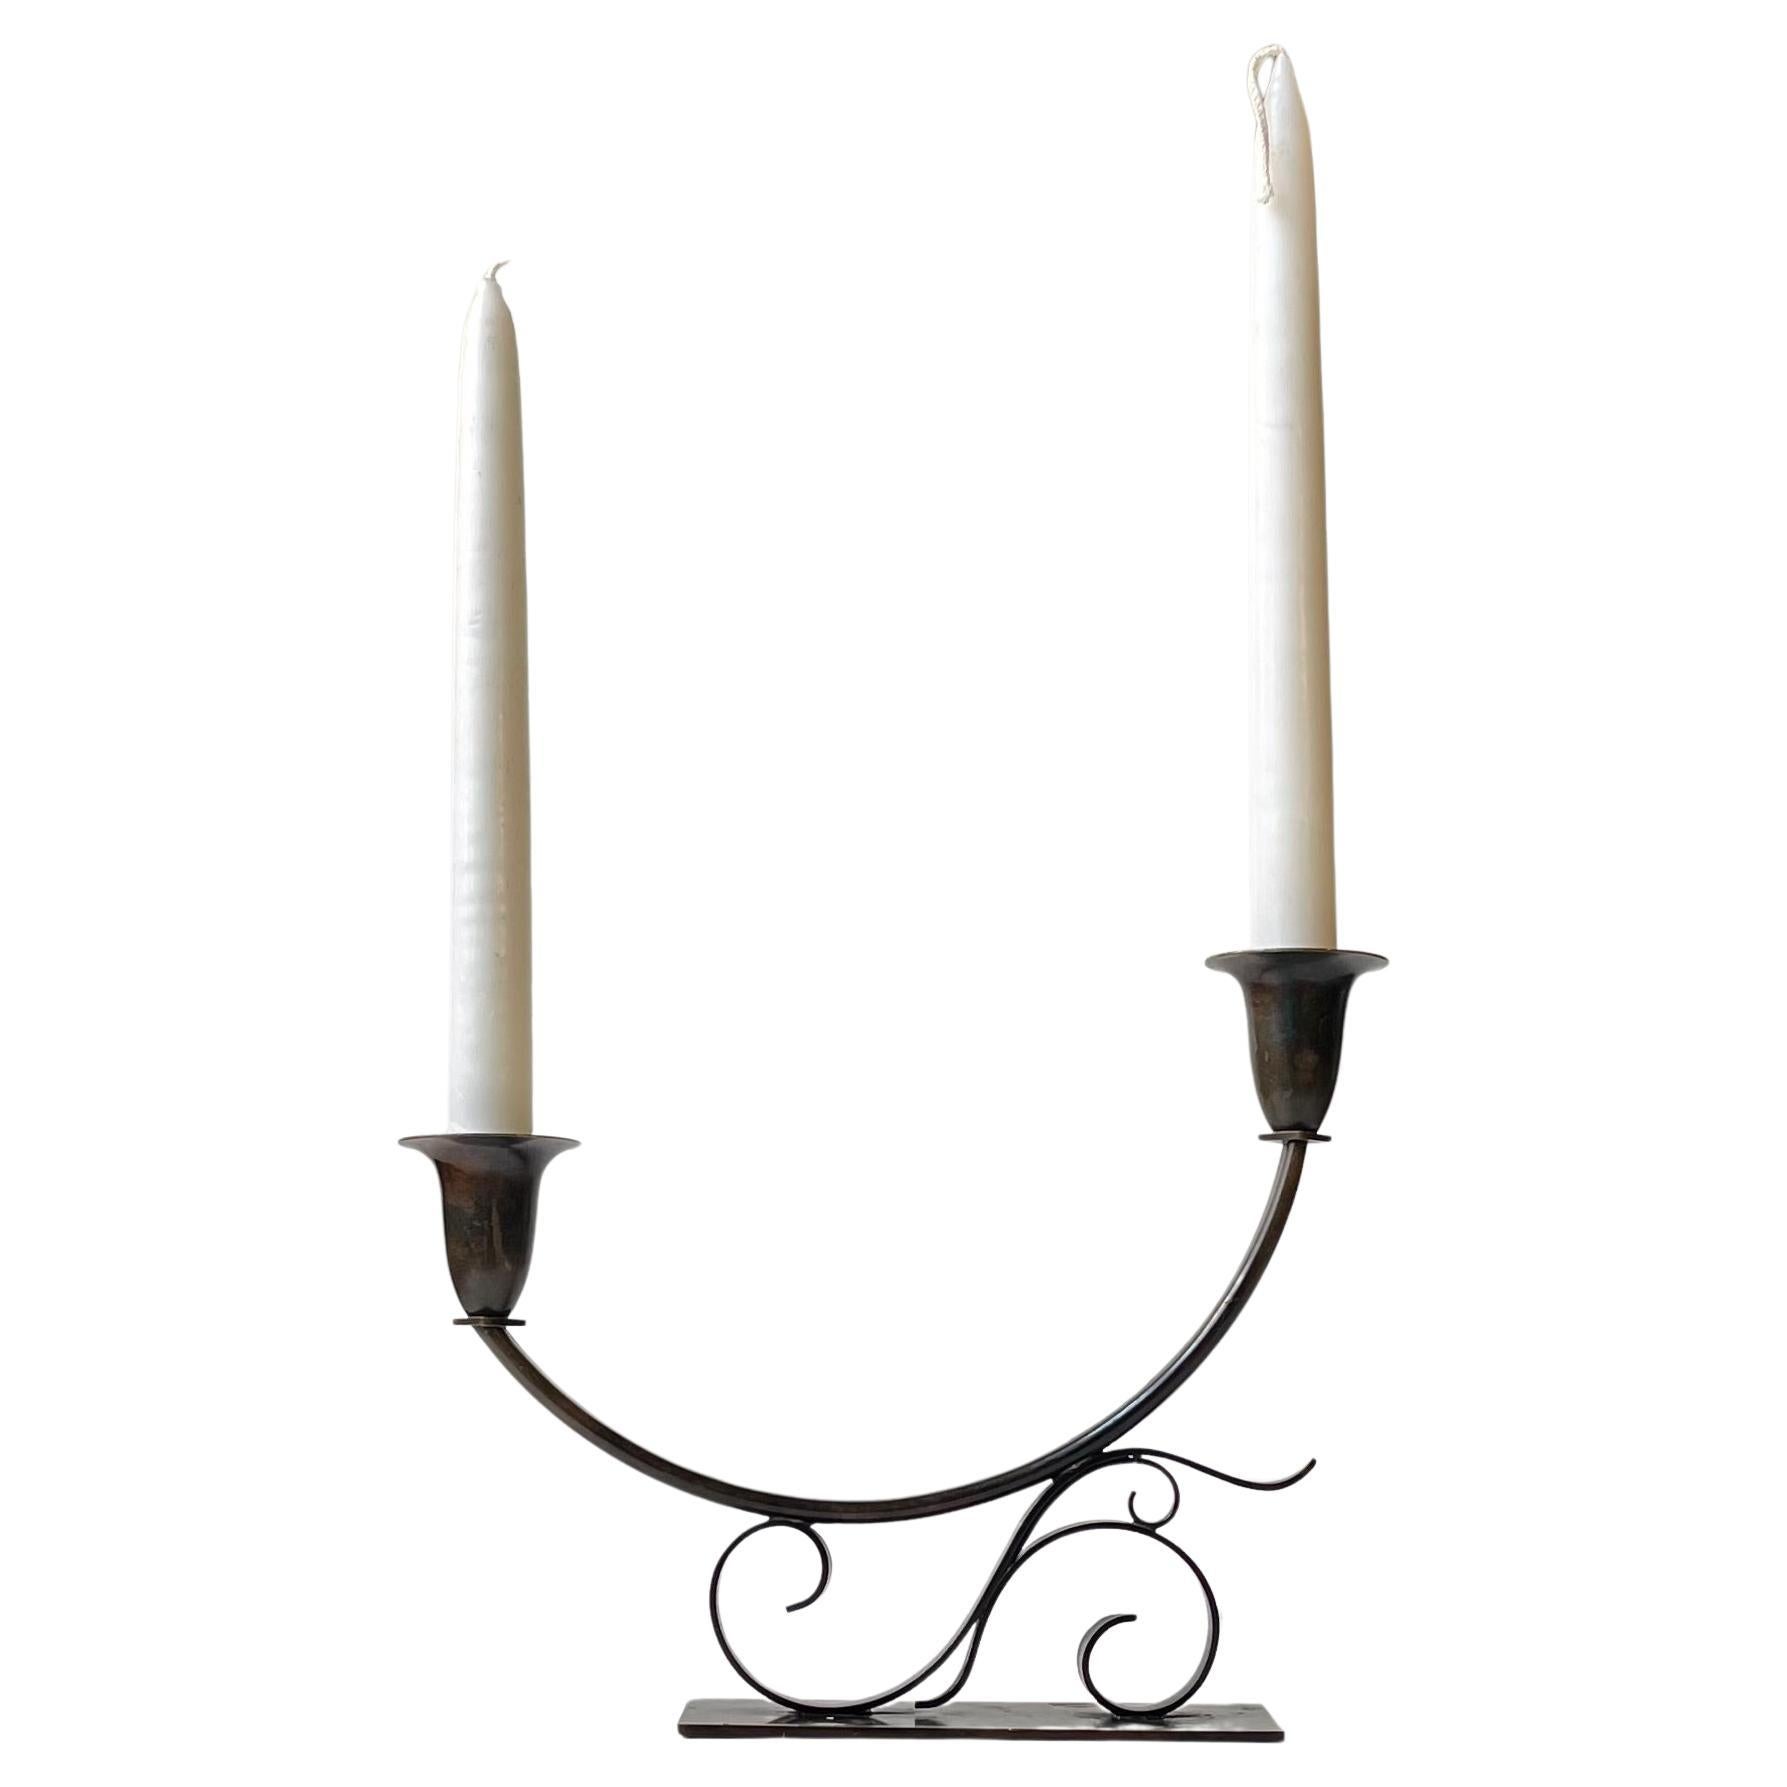 Art Deco Patinated Bronze Candle Holder by Holger Fredericia, 1930s